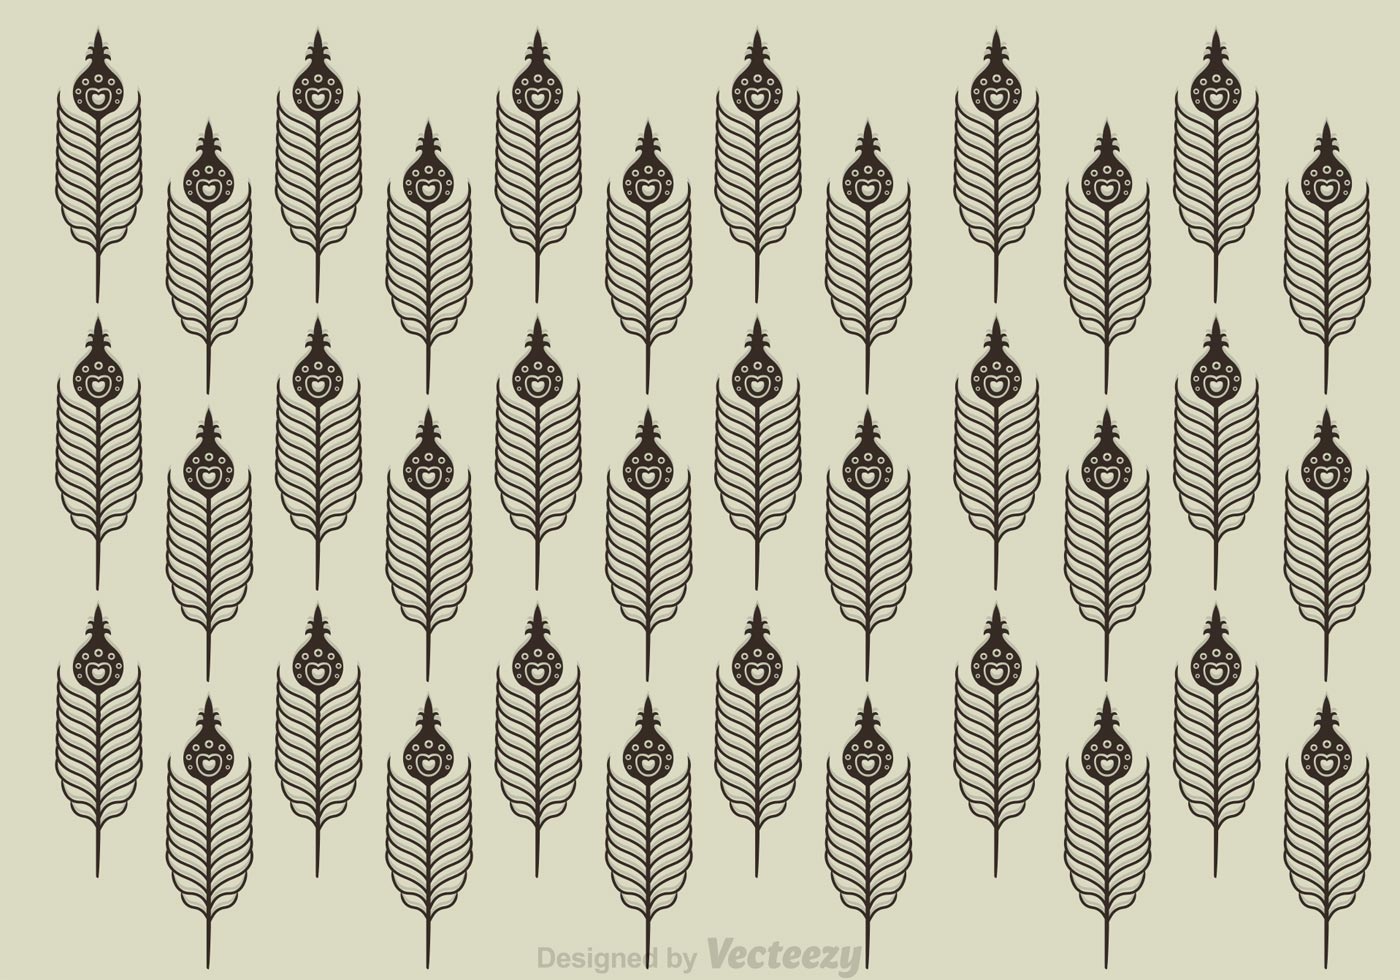 Download Peacock Feather Pattern - Download Free Vectors, Clipart ...